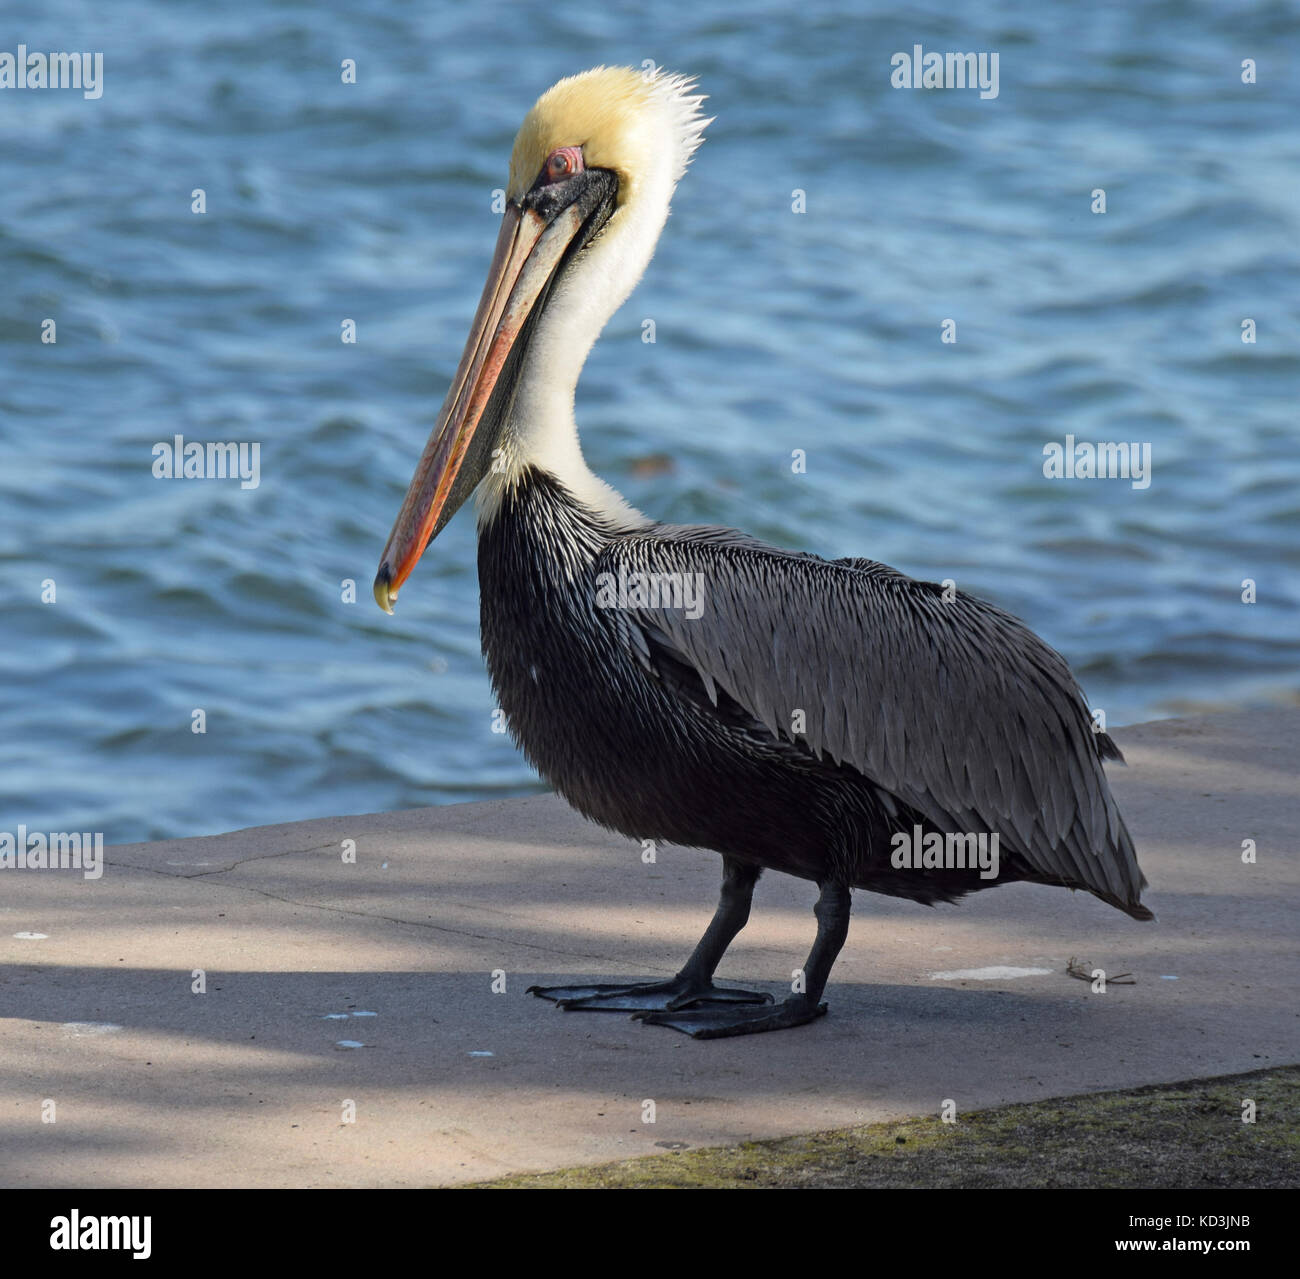 Brown pelican commonly seen in Florida Stock Photo